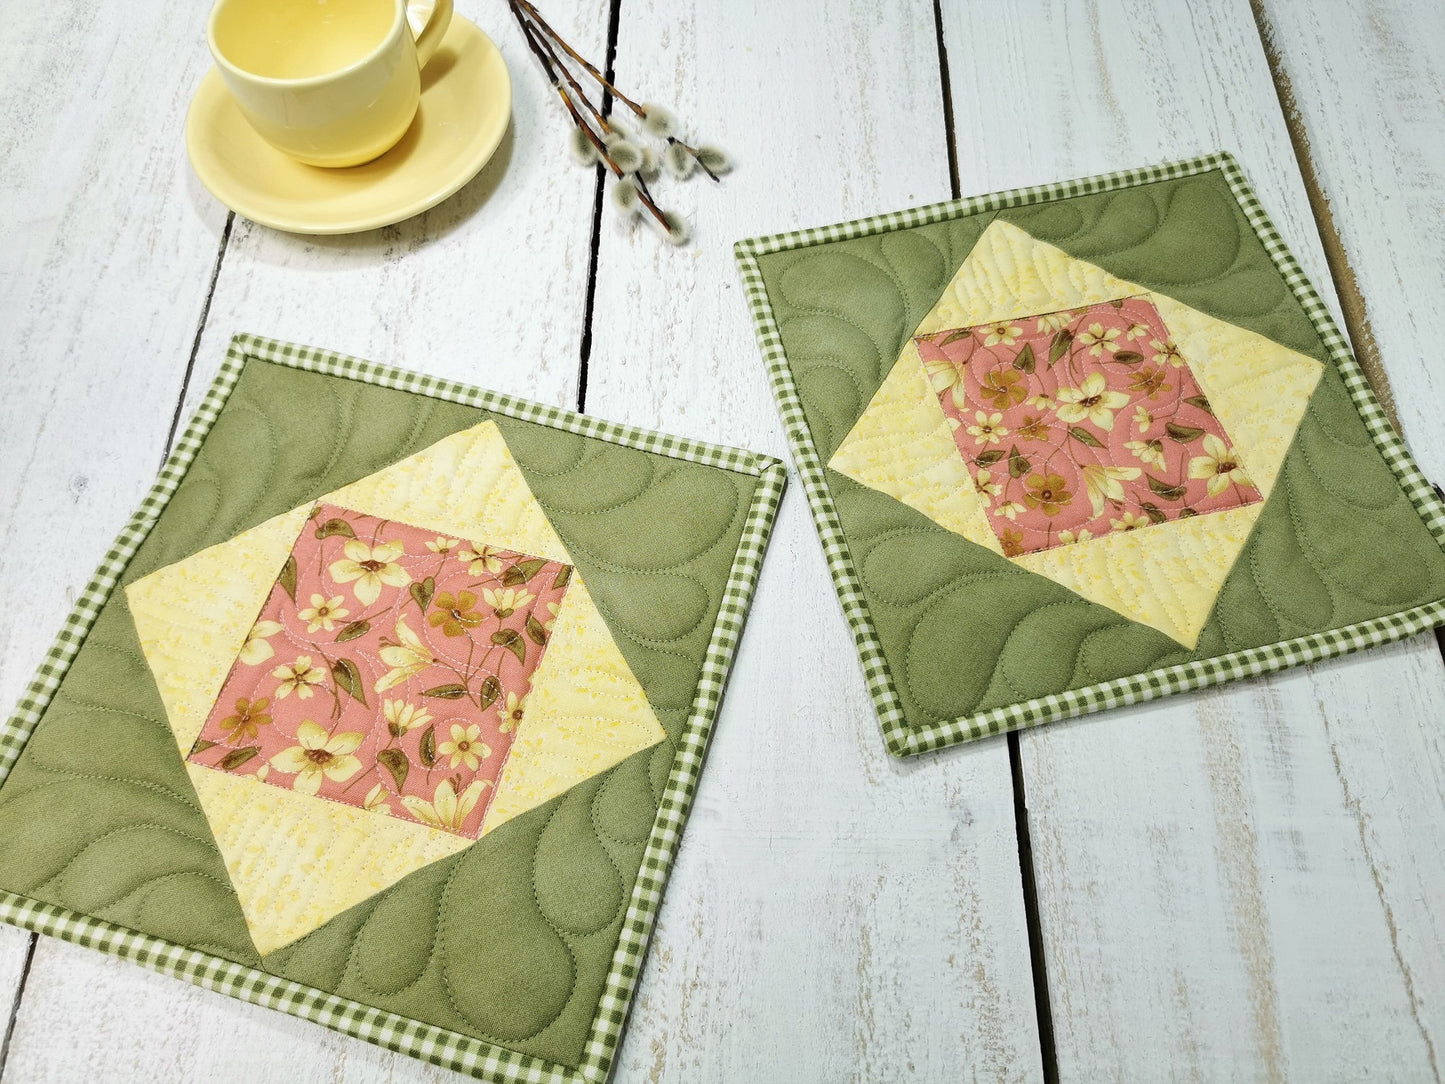 two pretty green and yellow patchwork potholders  with a pink floral focal fabric. Custom quilting adds nice texture. Green gingham binding. Background has small yellow teacup with a few pussywillow branches showing scale.